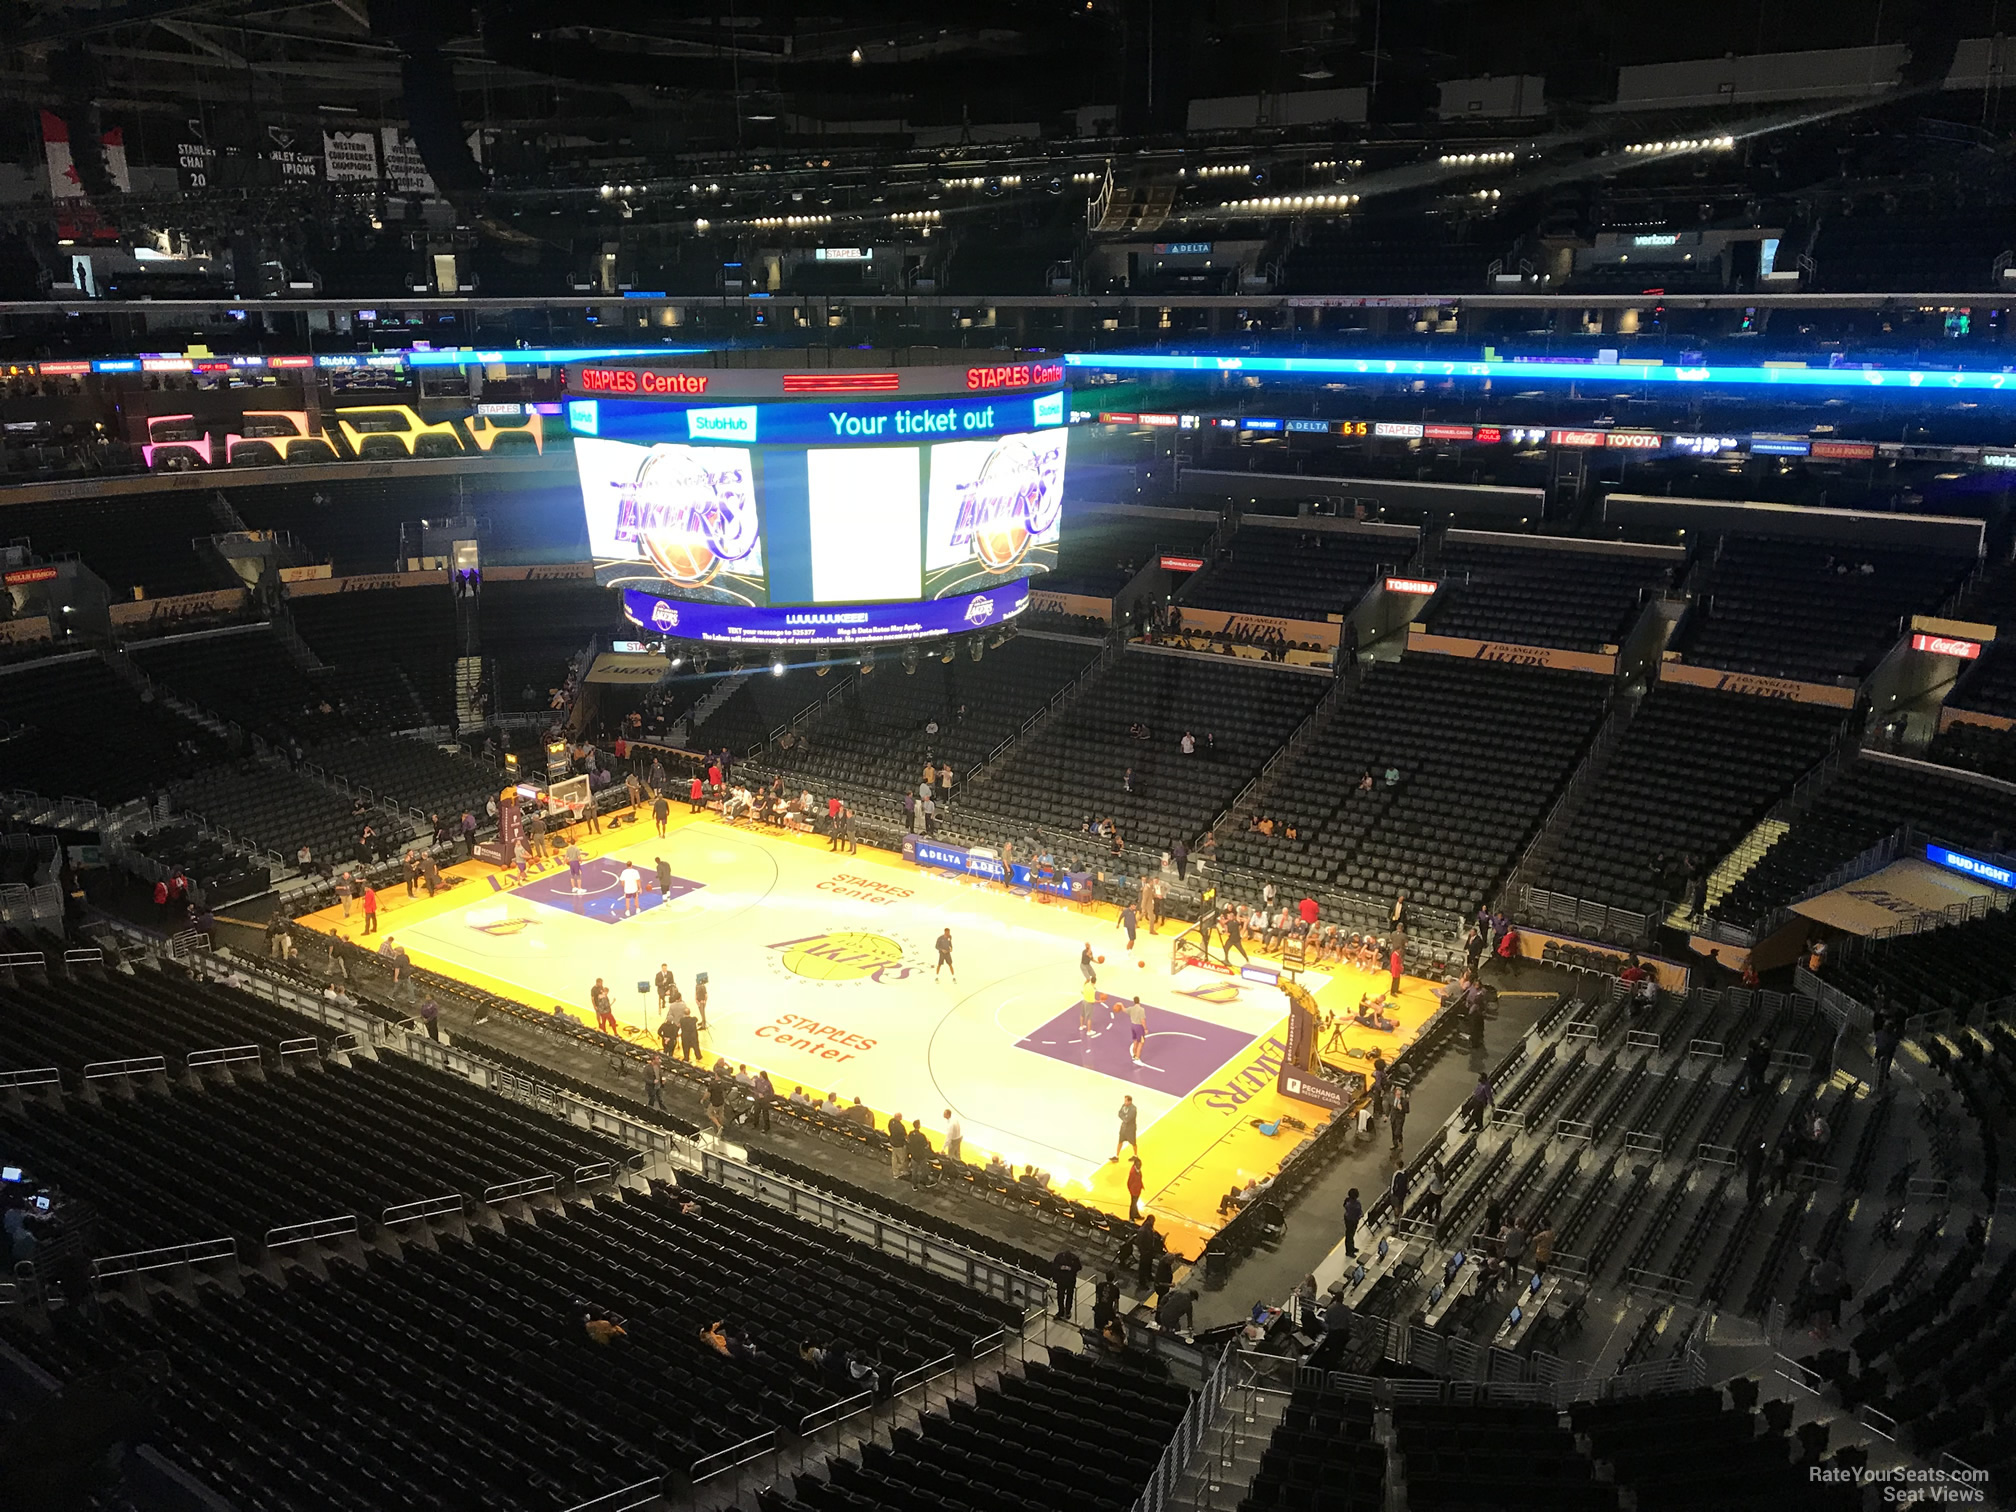 Staples Center Section 315 - Clippers/Lakers - RateYourSeats.com